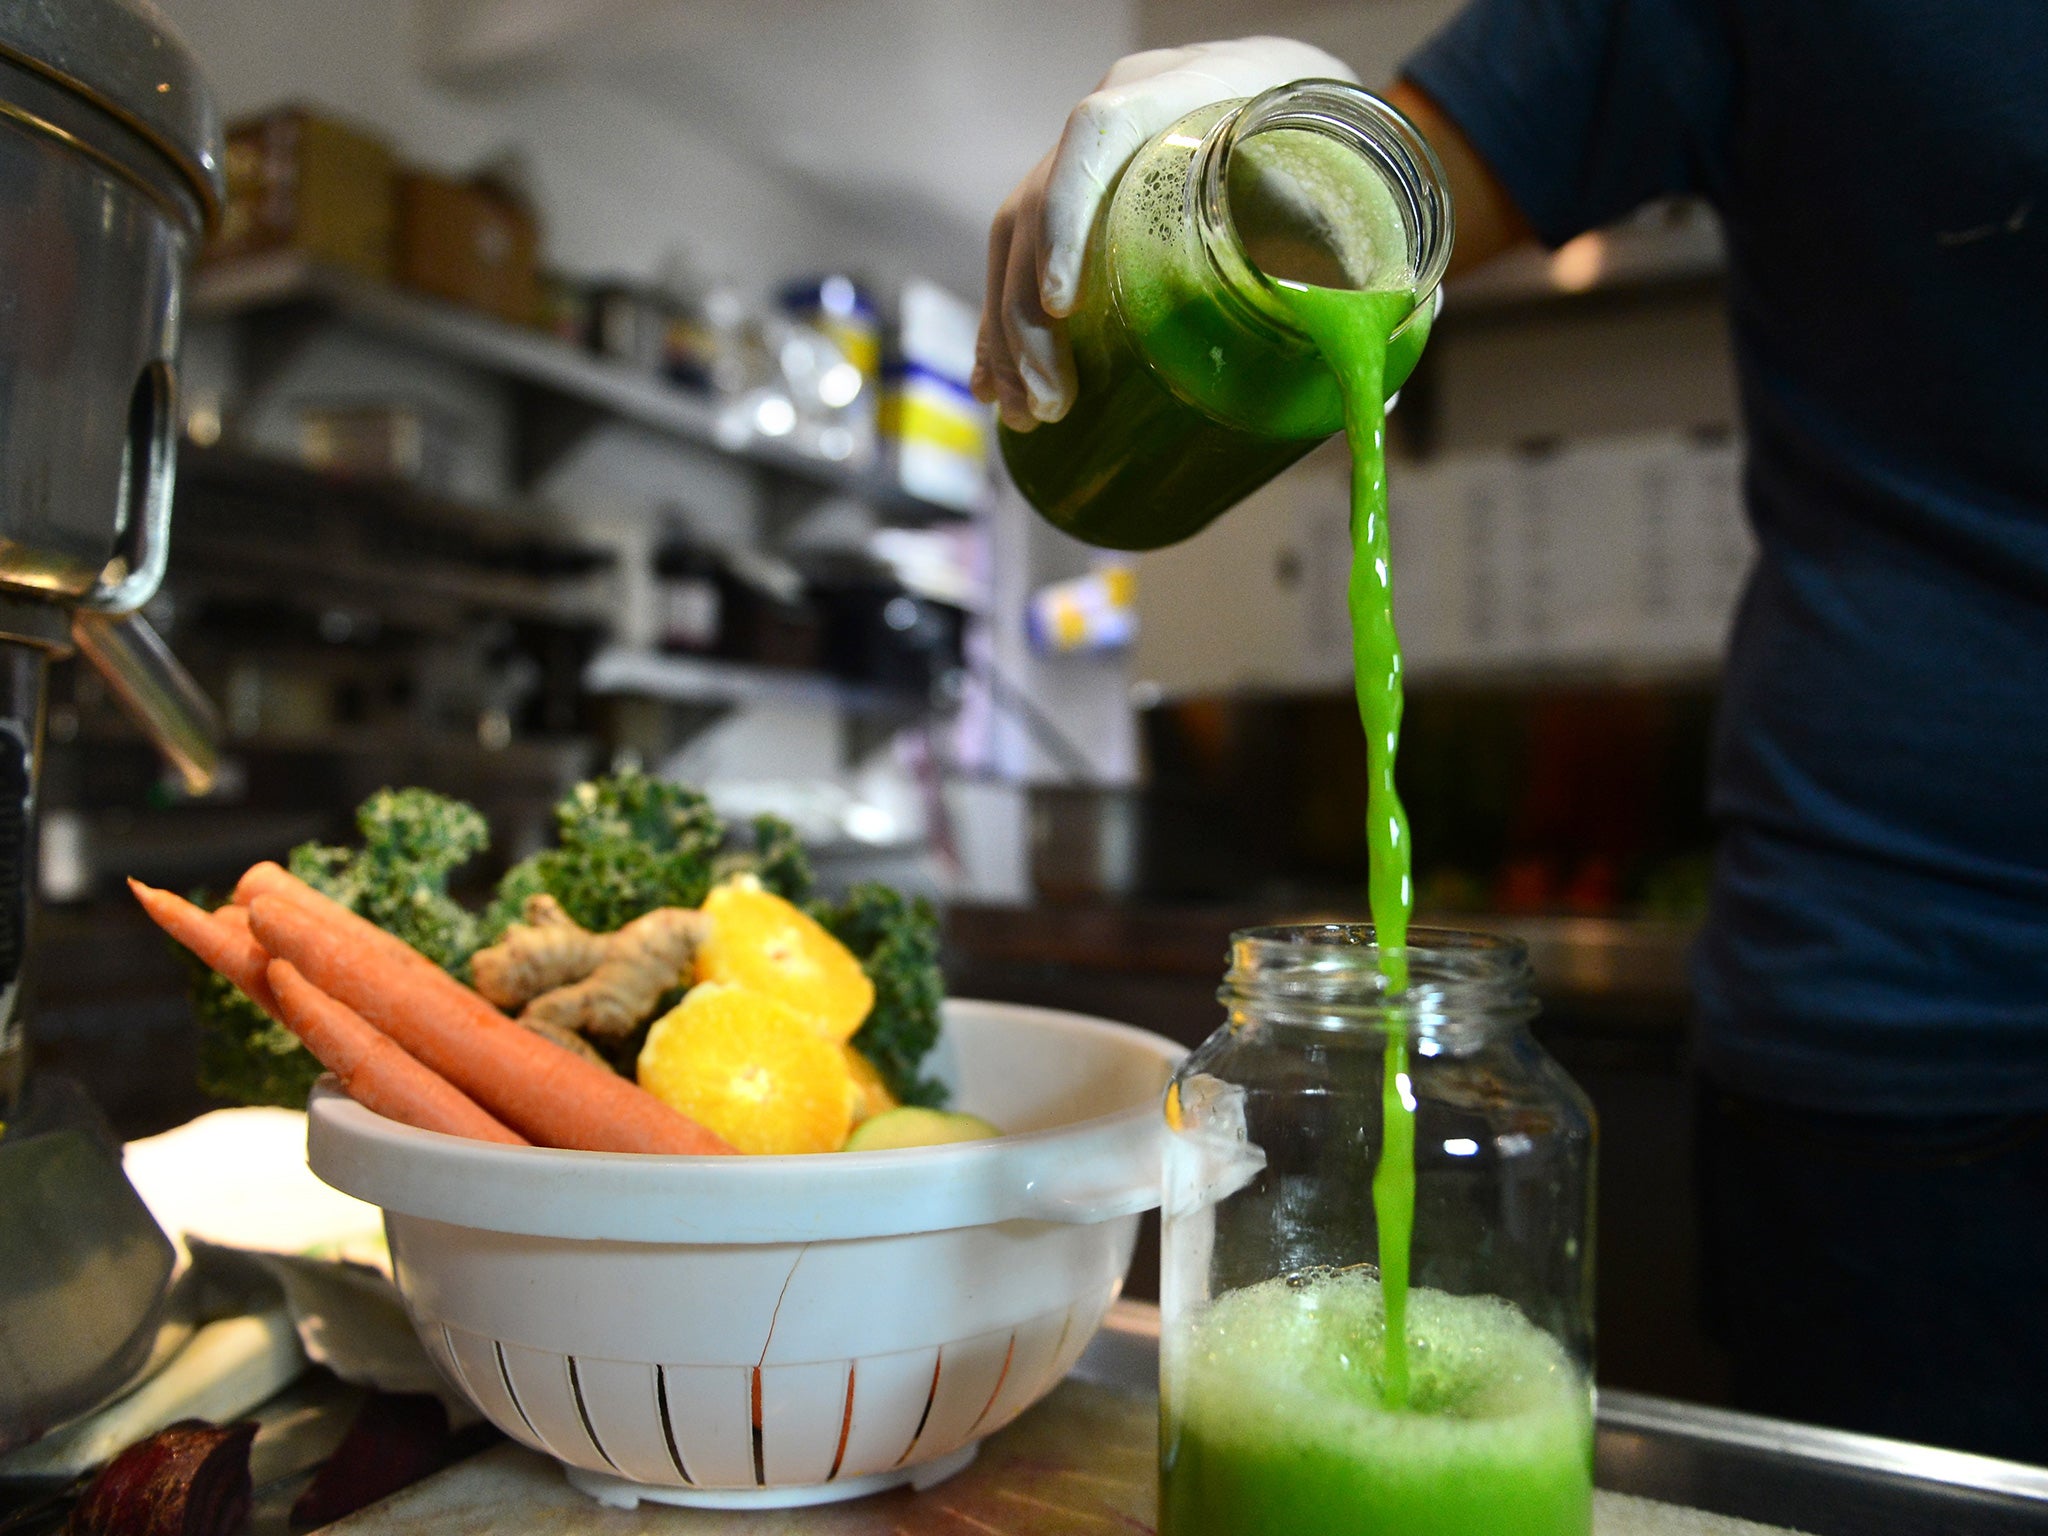 A Kale smoothie is created in a juice bar in Silver Lake, Los Angeles